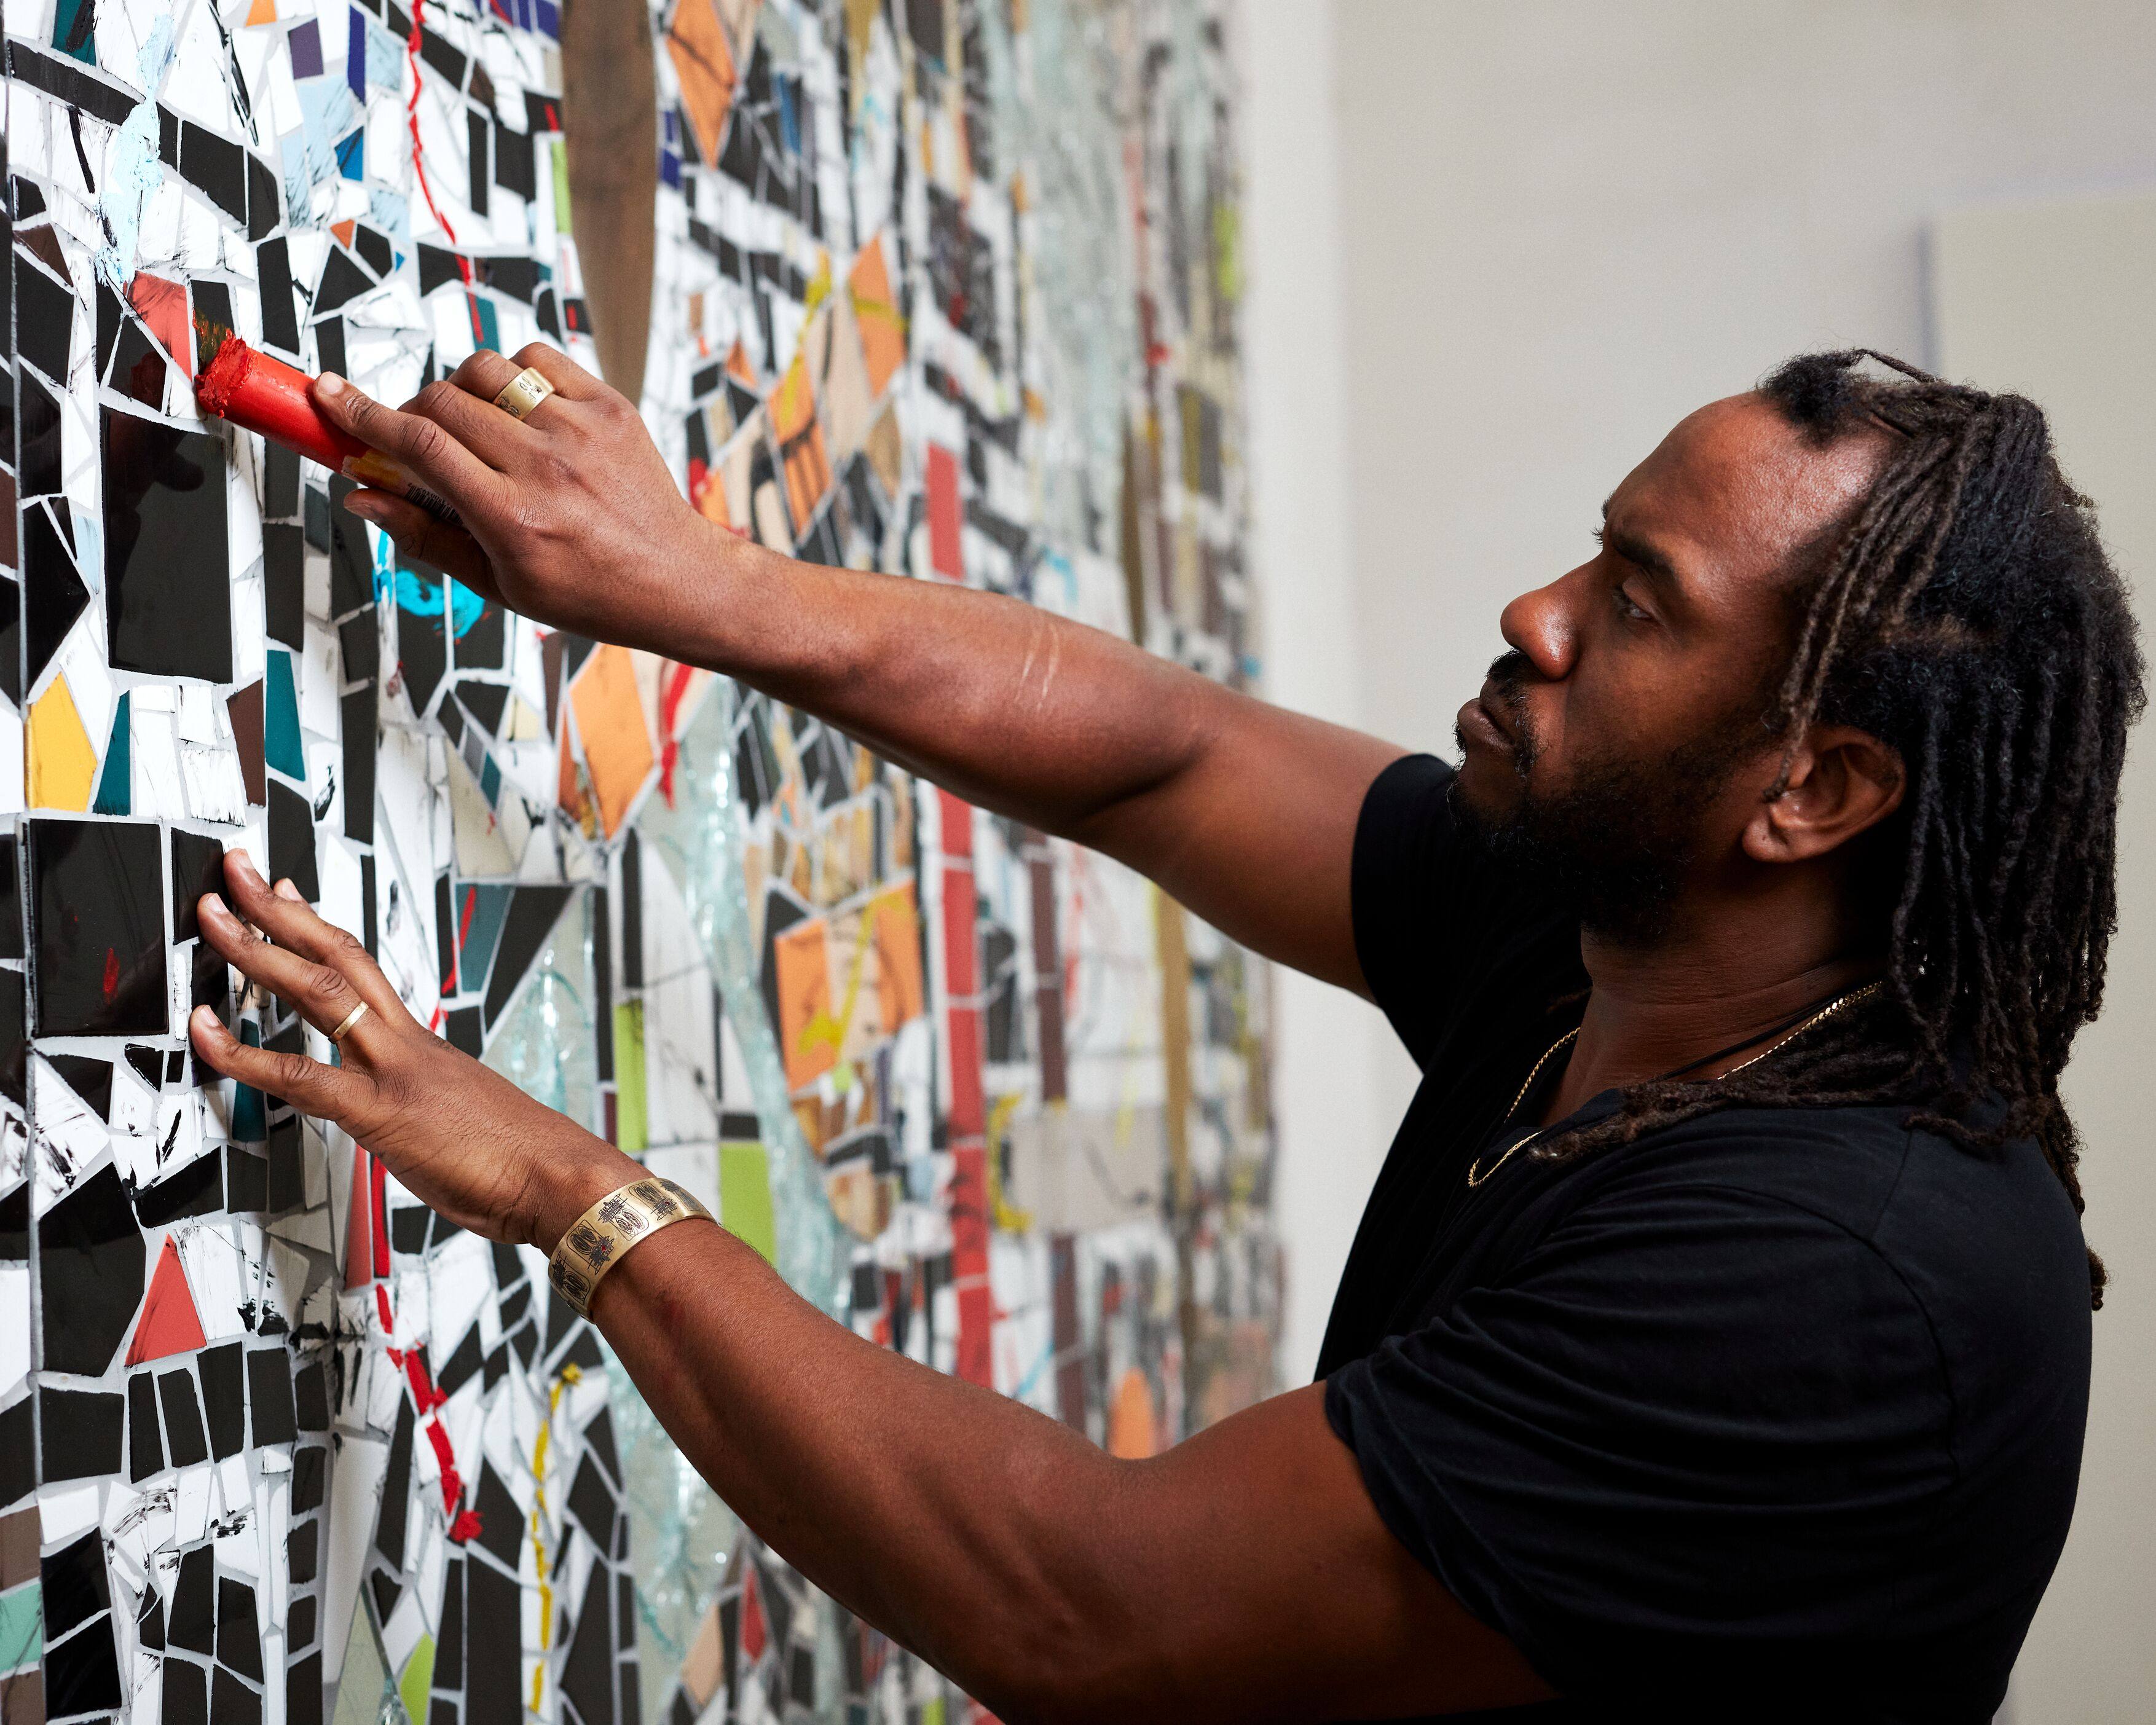 Artist Rashid Johnson. With his first solo exhibition in Asia about to open in Hong Kong, the American artist paints us a personal portrait of his creative journey. Photo: Axel Dupeux / Hauser & Wirth